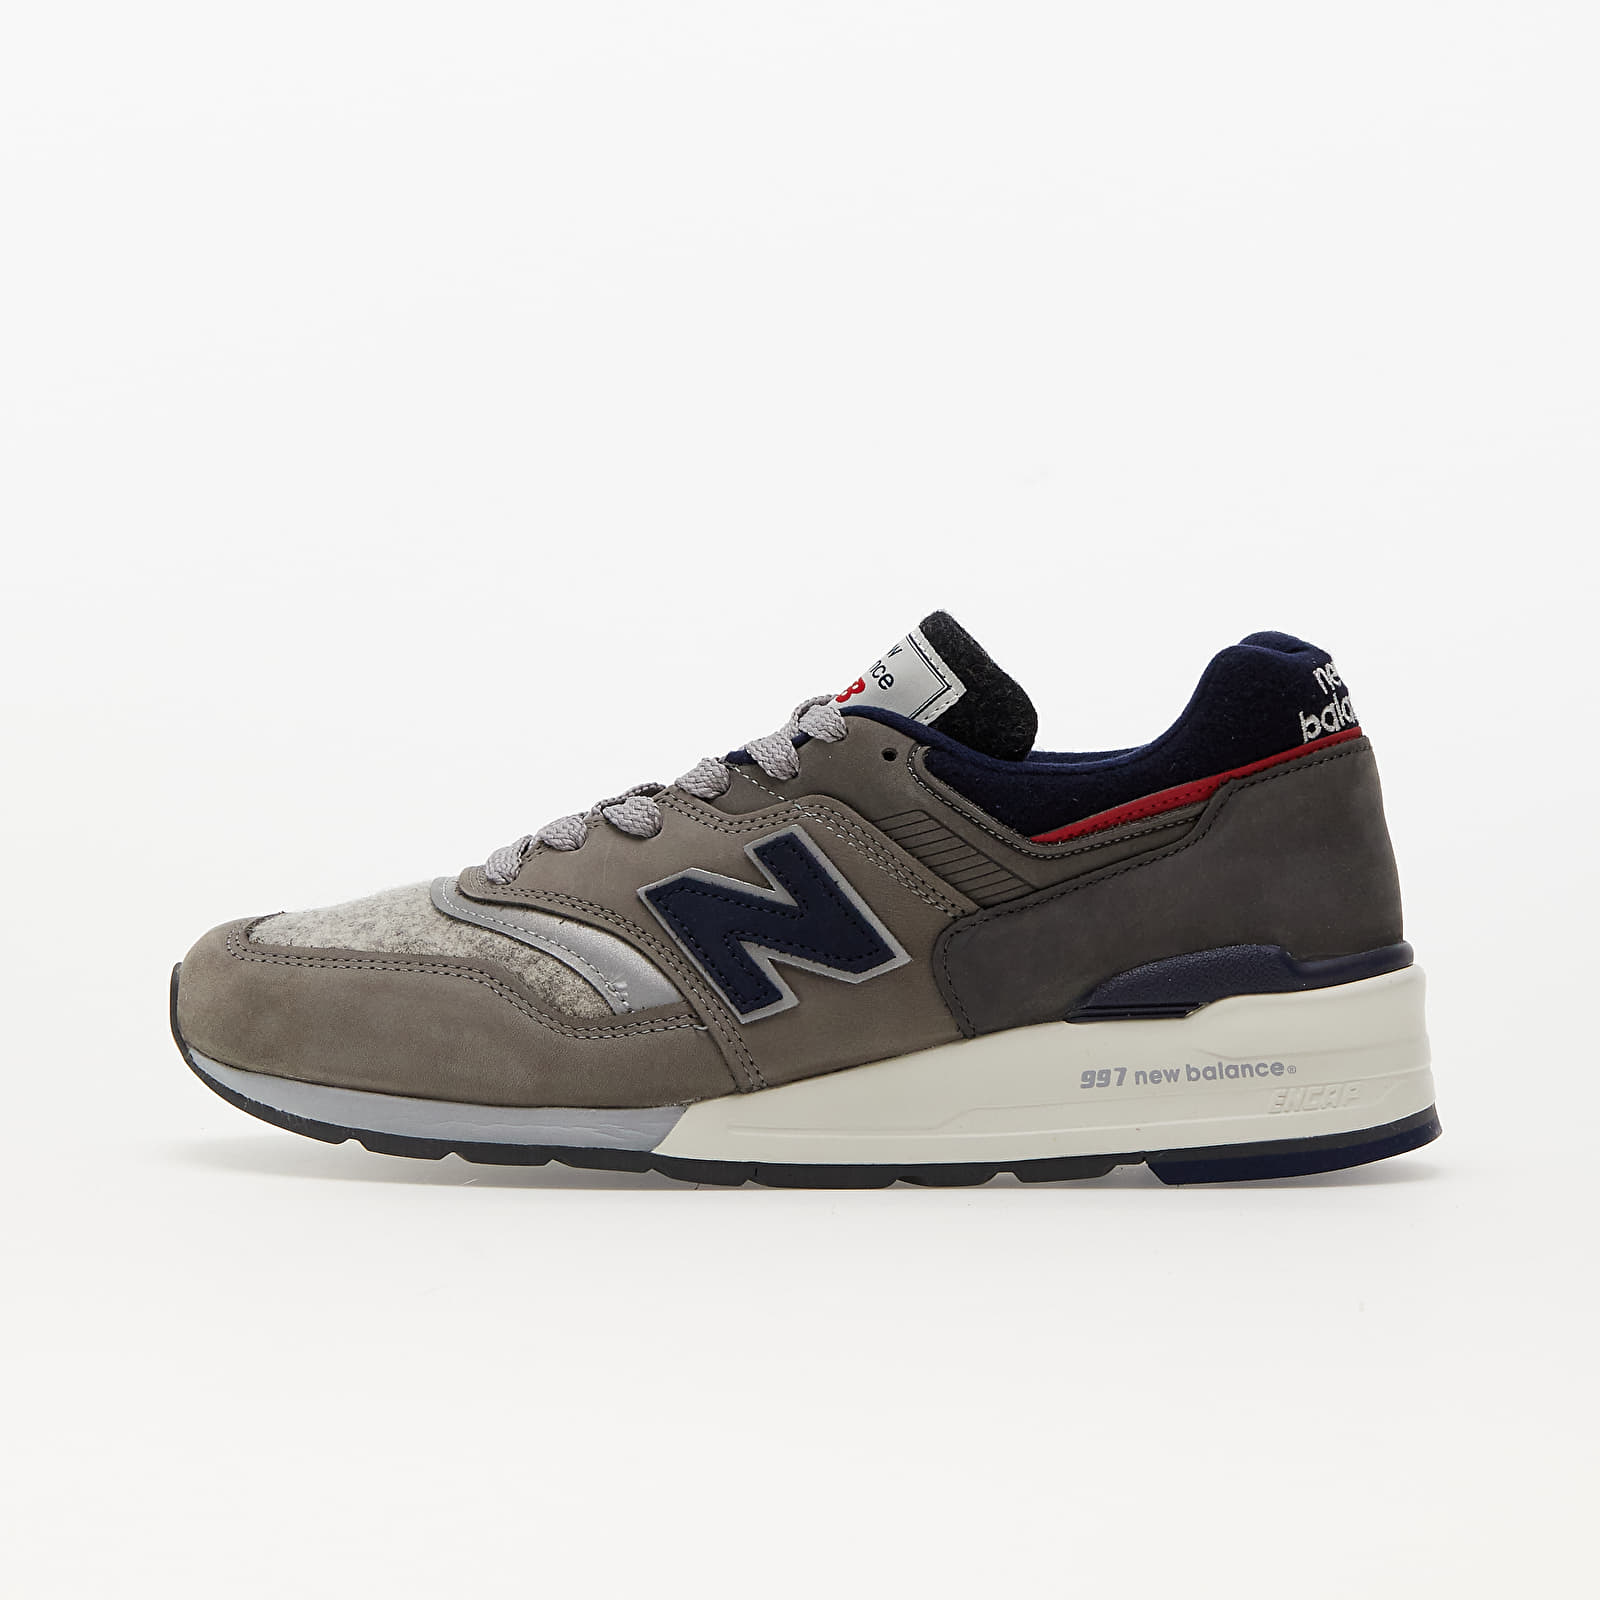 Chaussures et baskets homme New Balance x Woolrich 997 Grey/ Blue-Red